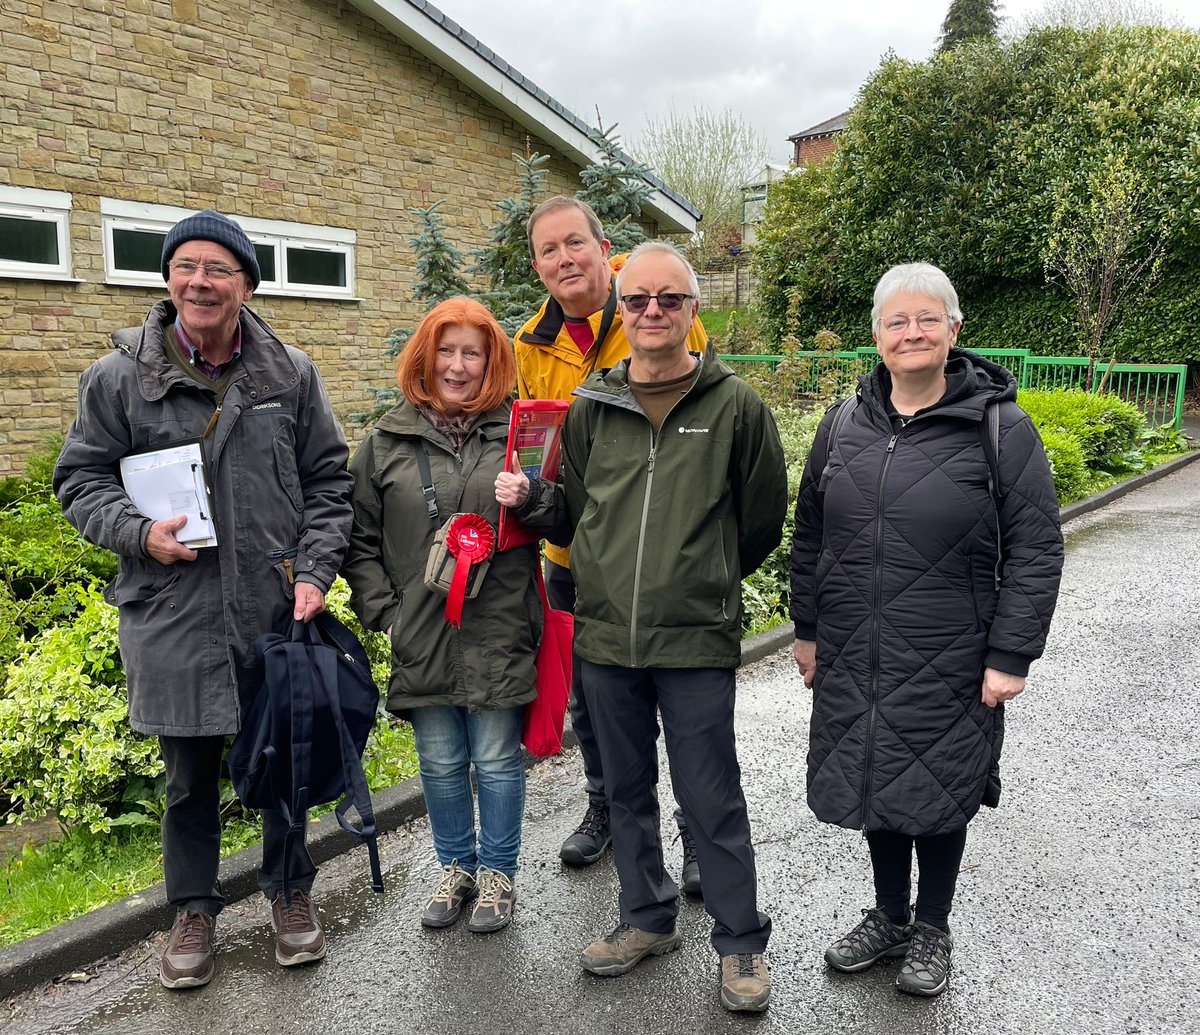 Good canvassing session in Bollington for Tim Roca. Managed to avoid the rain.